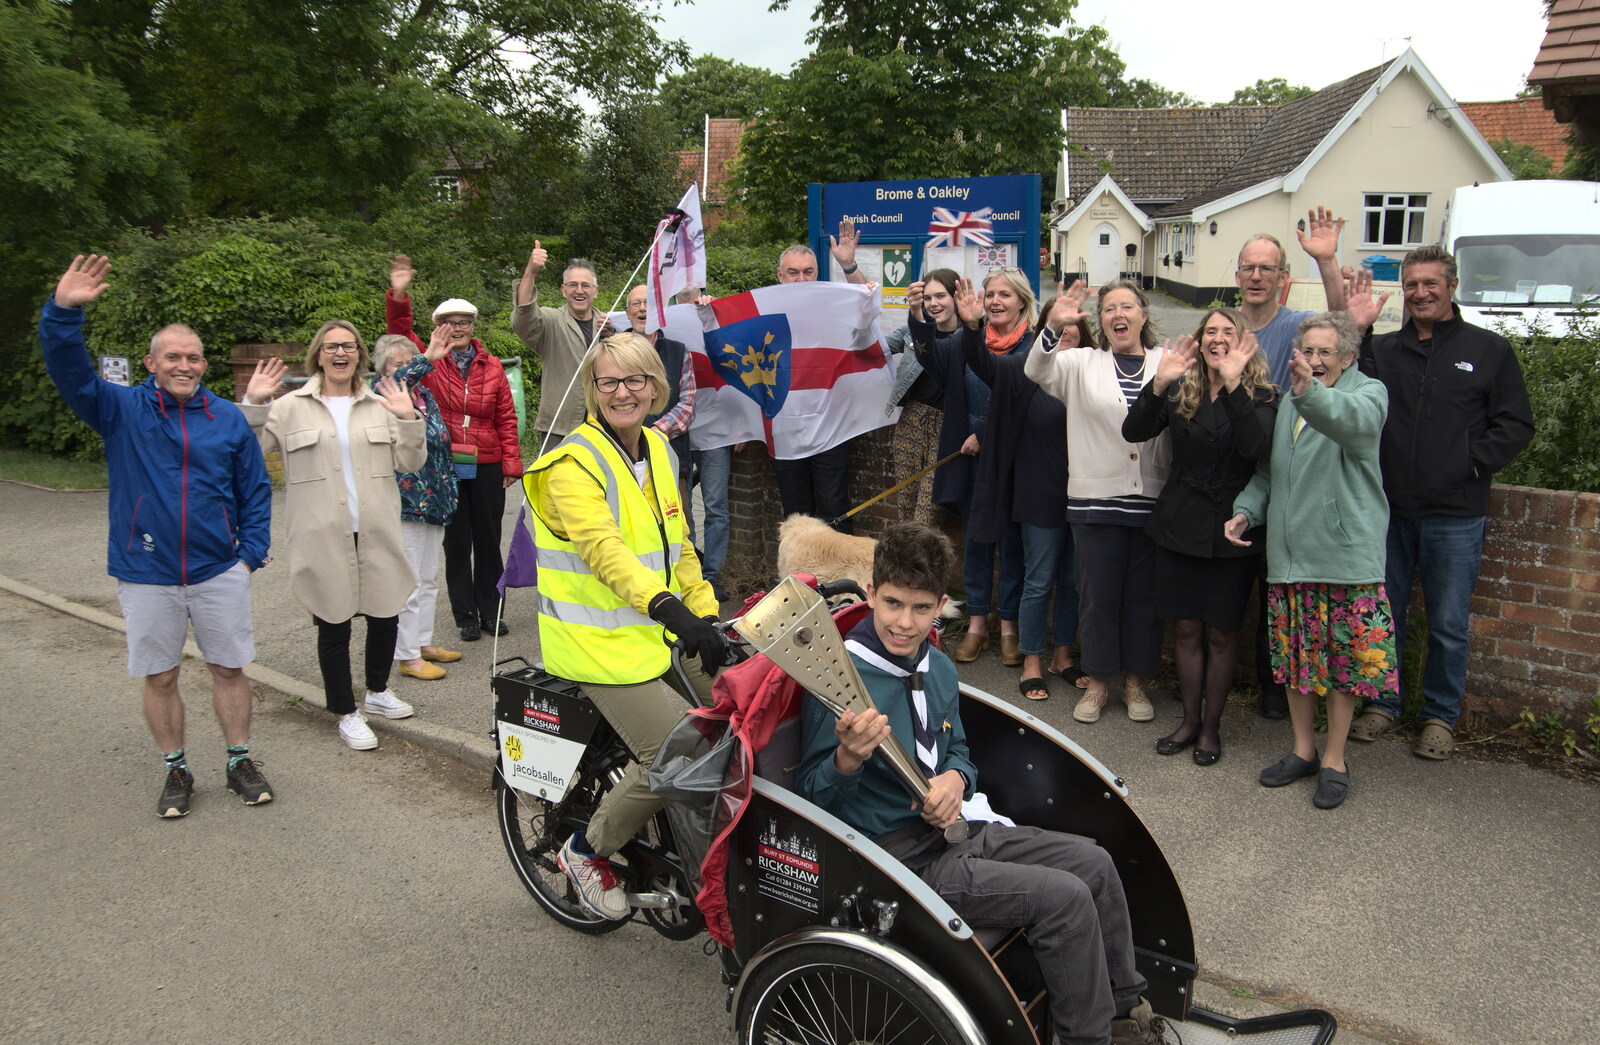 A group photo occurs from The Jubilee Torch Run, Brome and Oakley, Suffolk - 25th May 2022